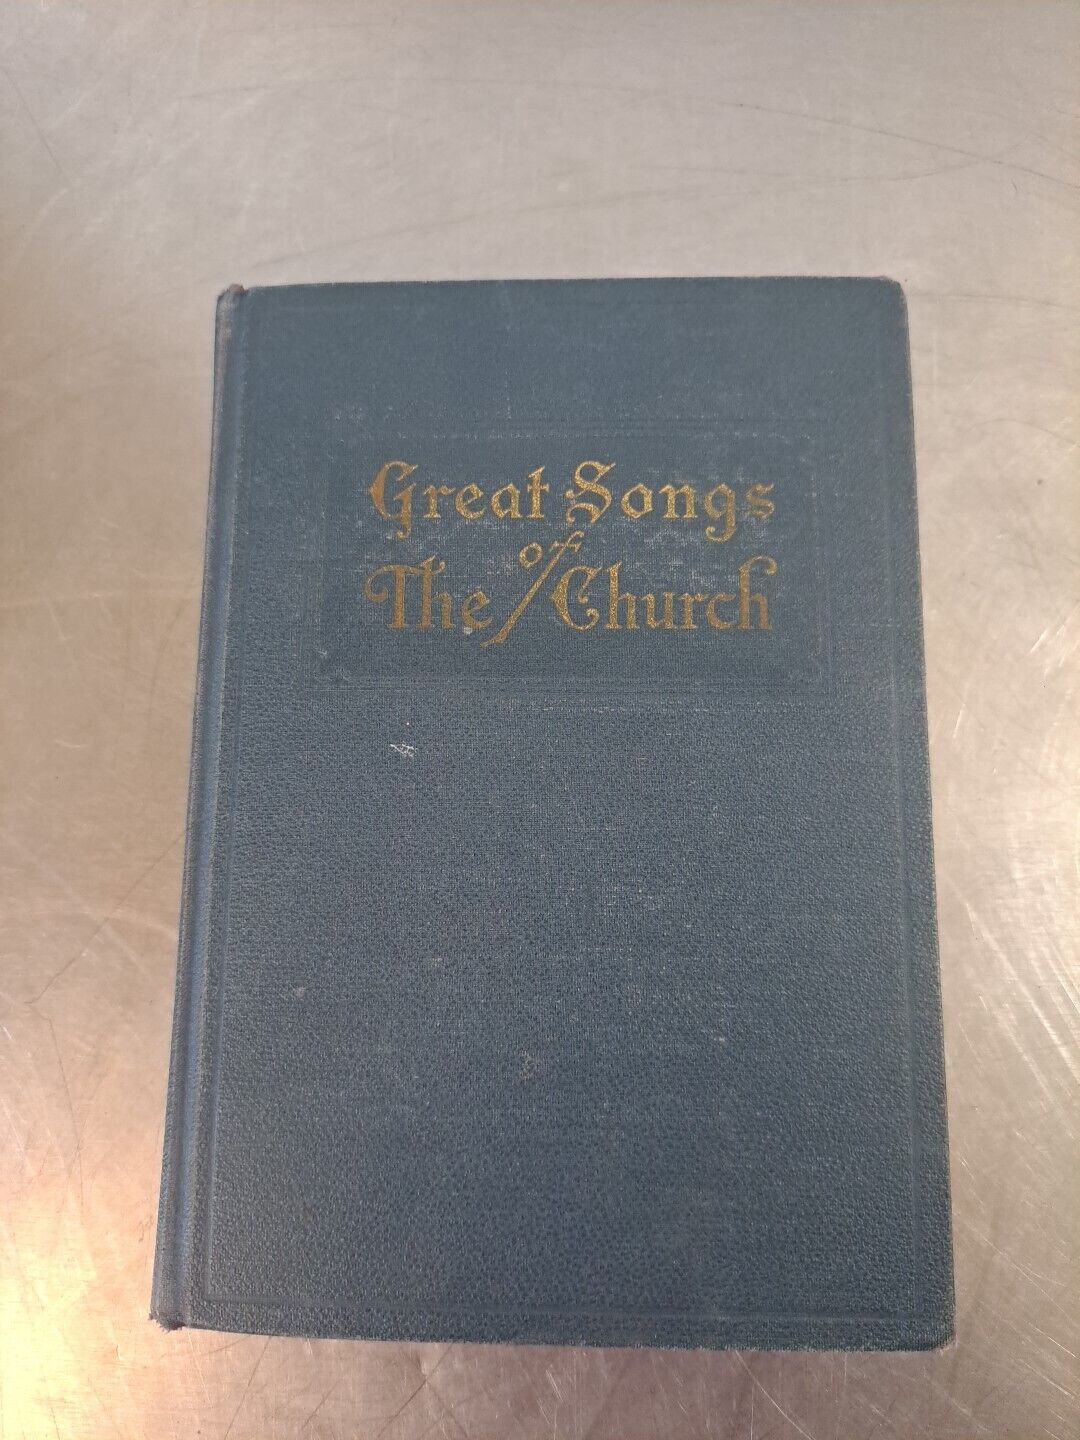 Vintage 1946 Hymnal GREAT SONGS OF THE CHURCH Number Two Hardcover Alphabetical